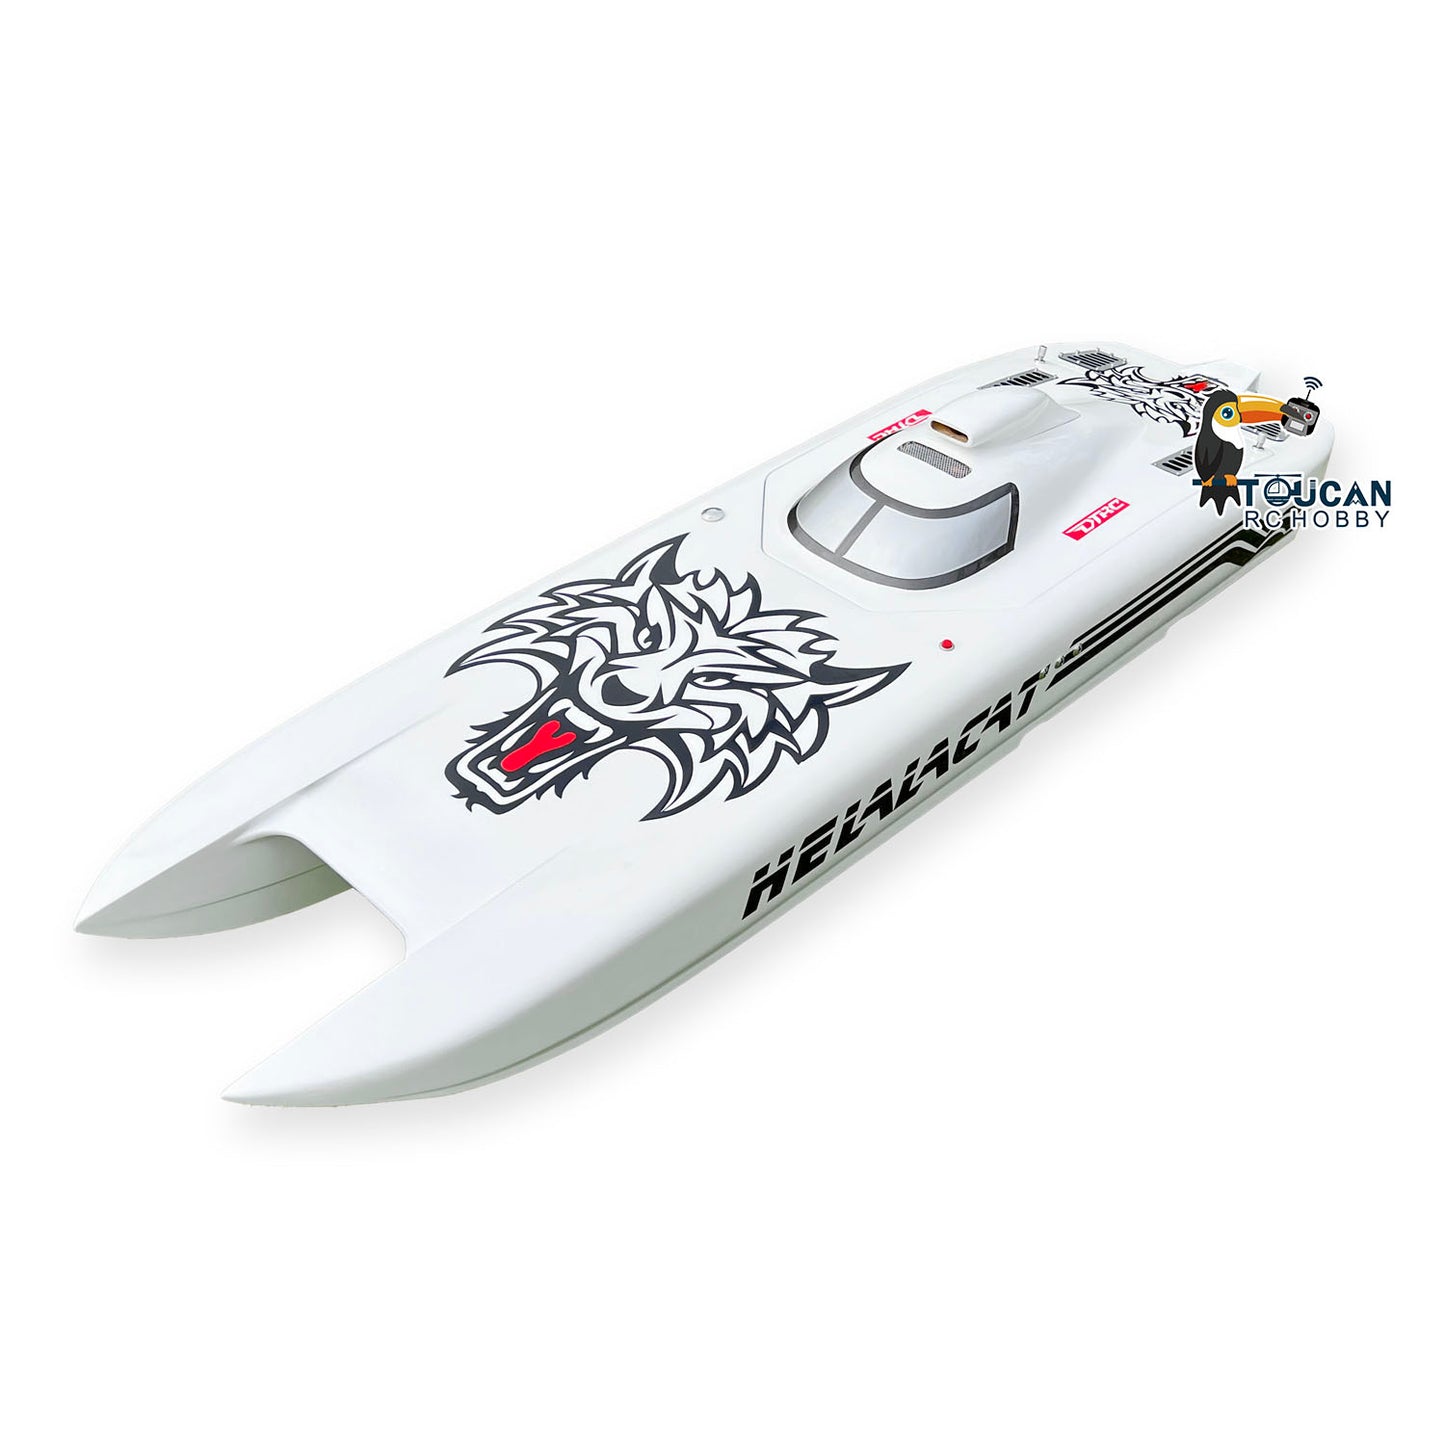 G30E 30CC Prepainted Gasoline Racing KIT RC Boat Hull DIY Model Kevlar for Advanced Player 1300*360*220mm Adult Present W/O Mount